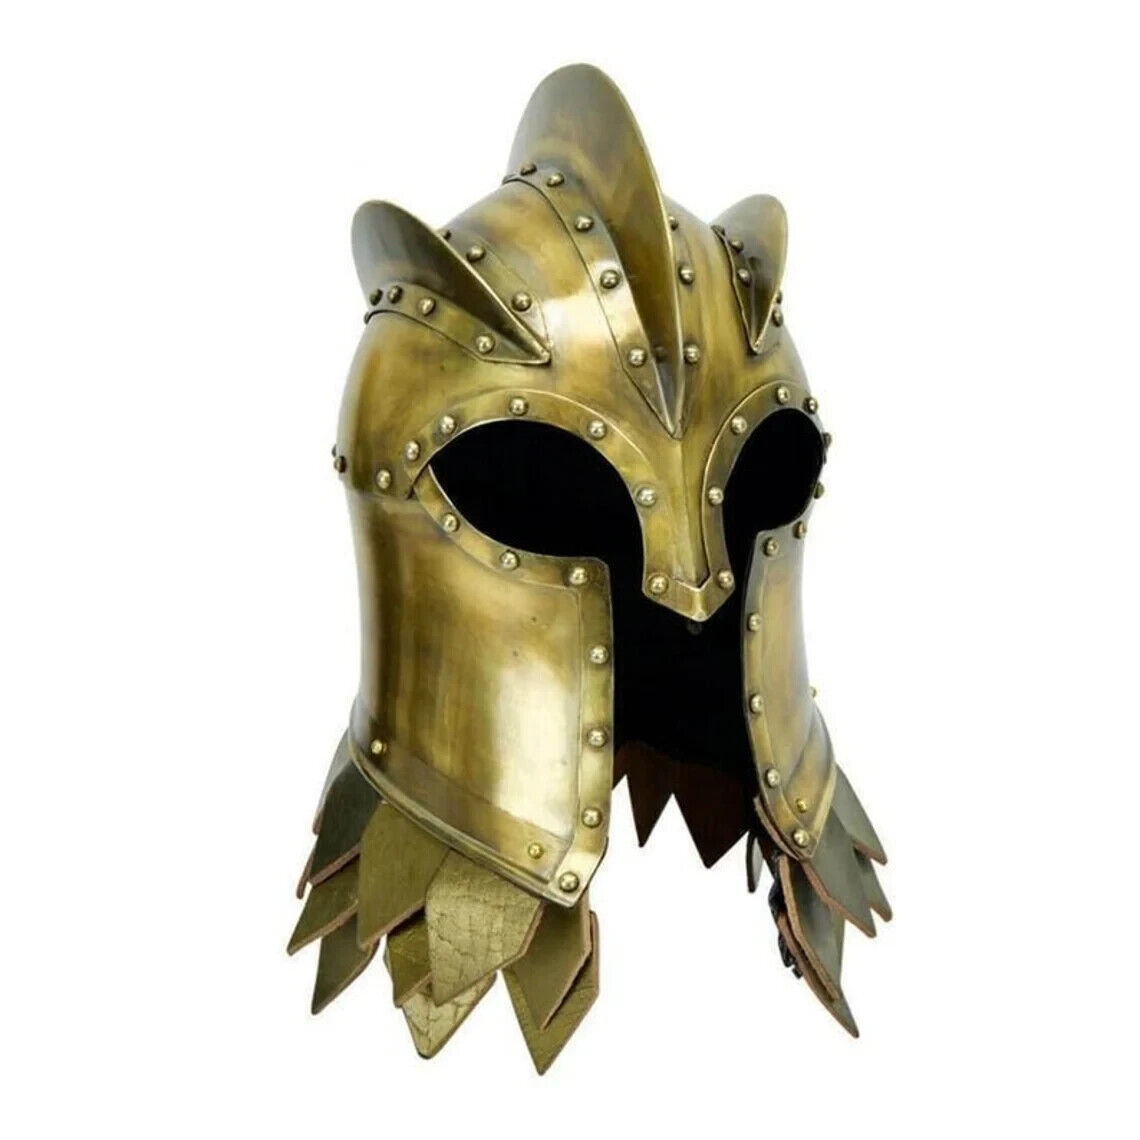 The Great Kings Guard Medieval Helmet, Baratheon Styled Game of Thrones Warrior